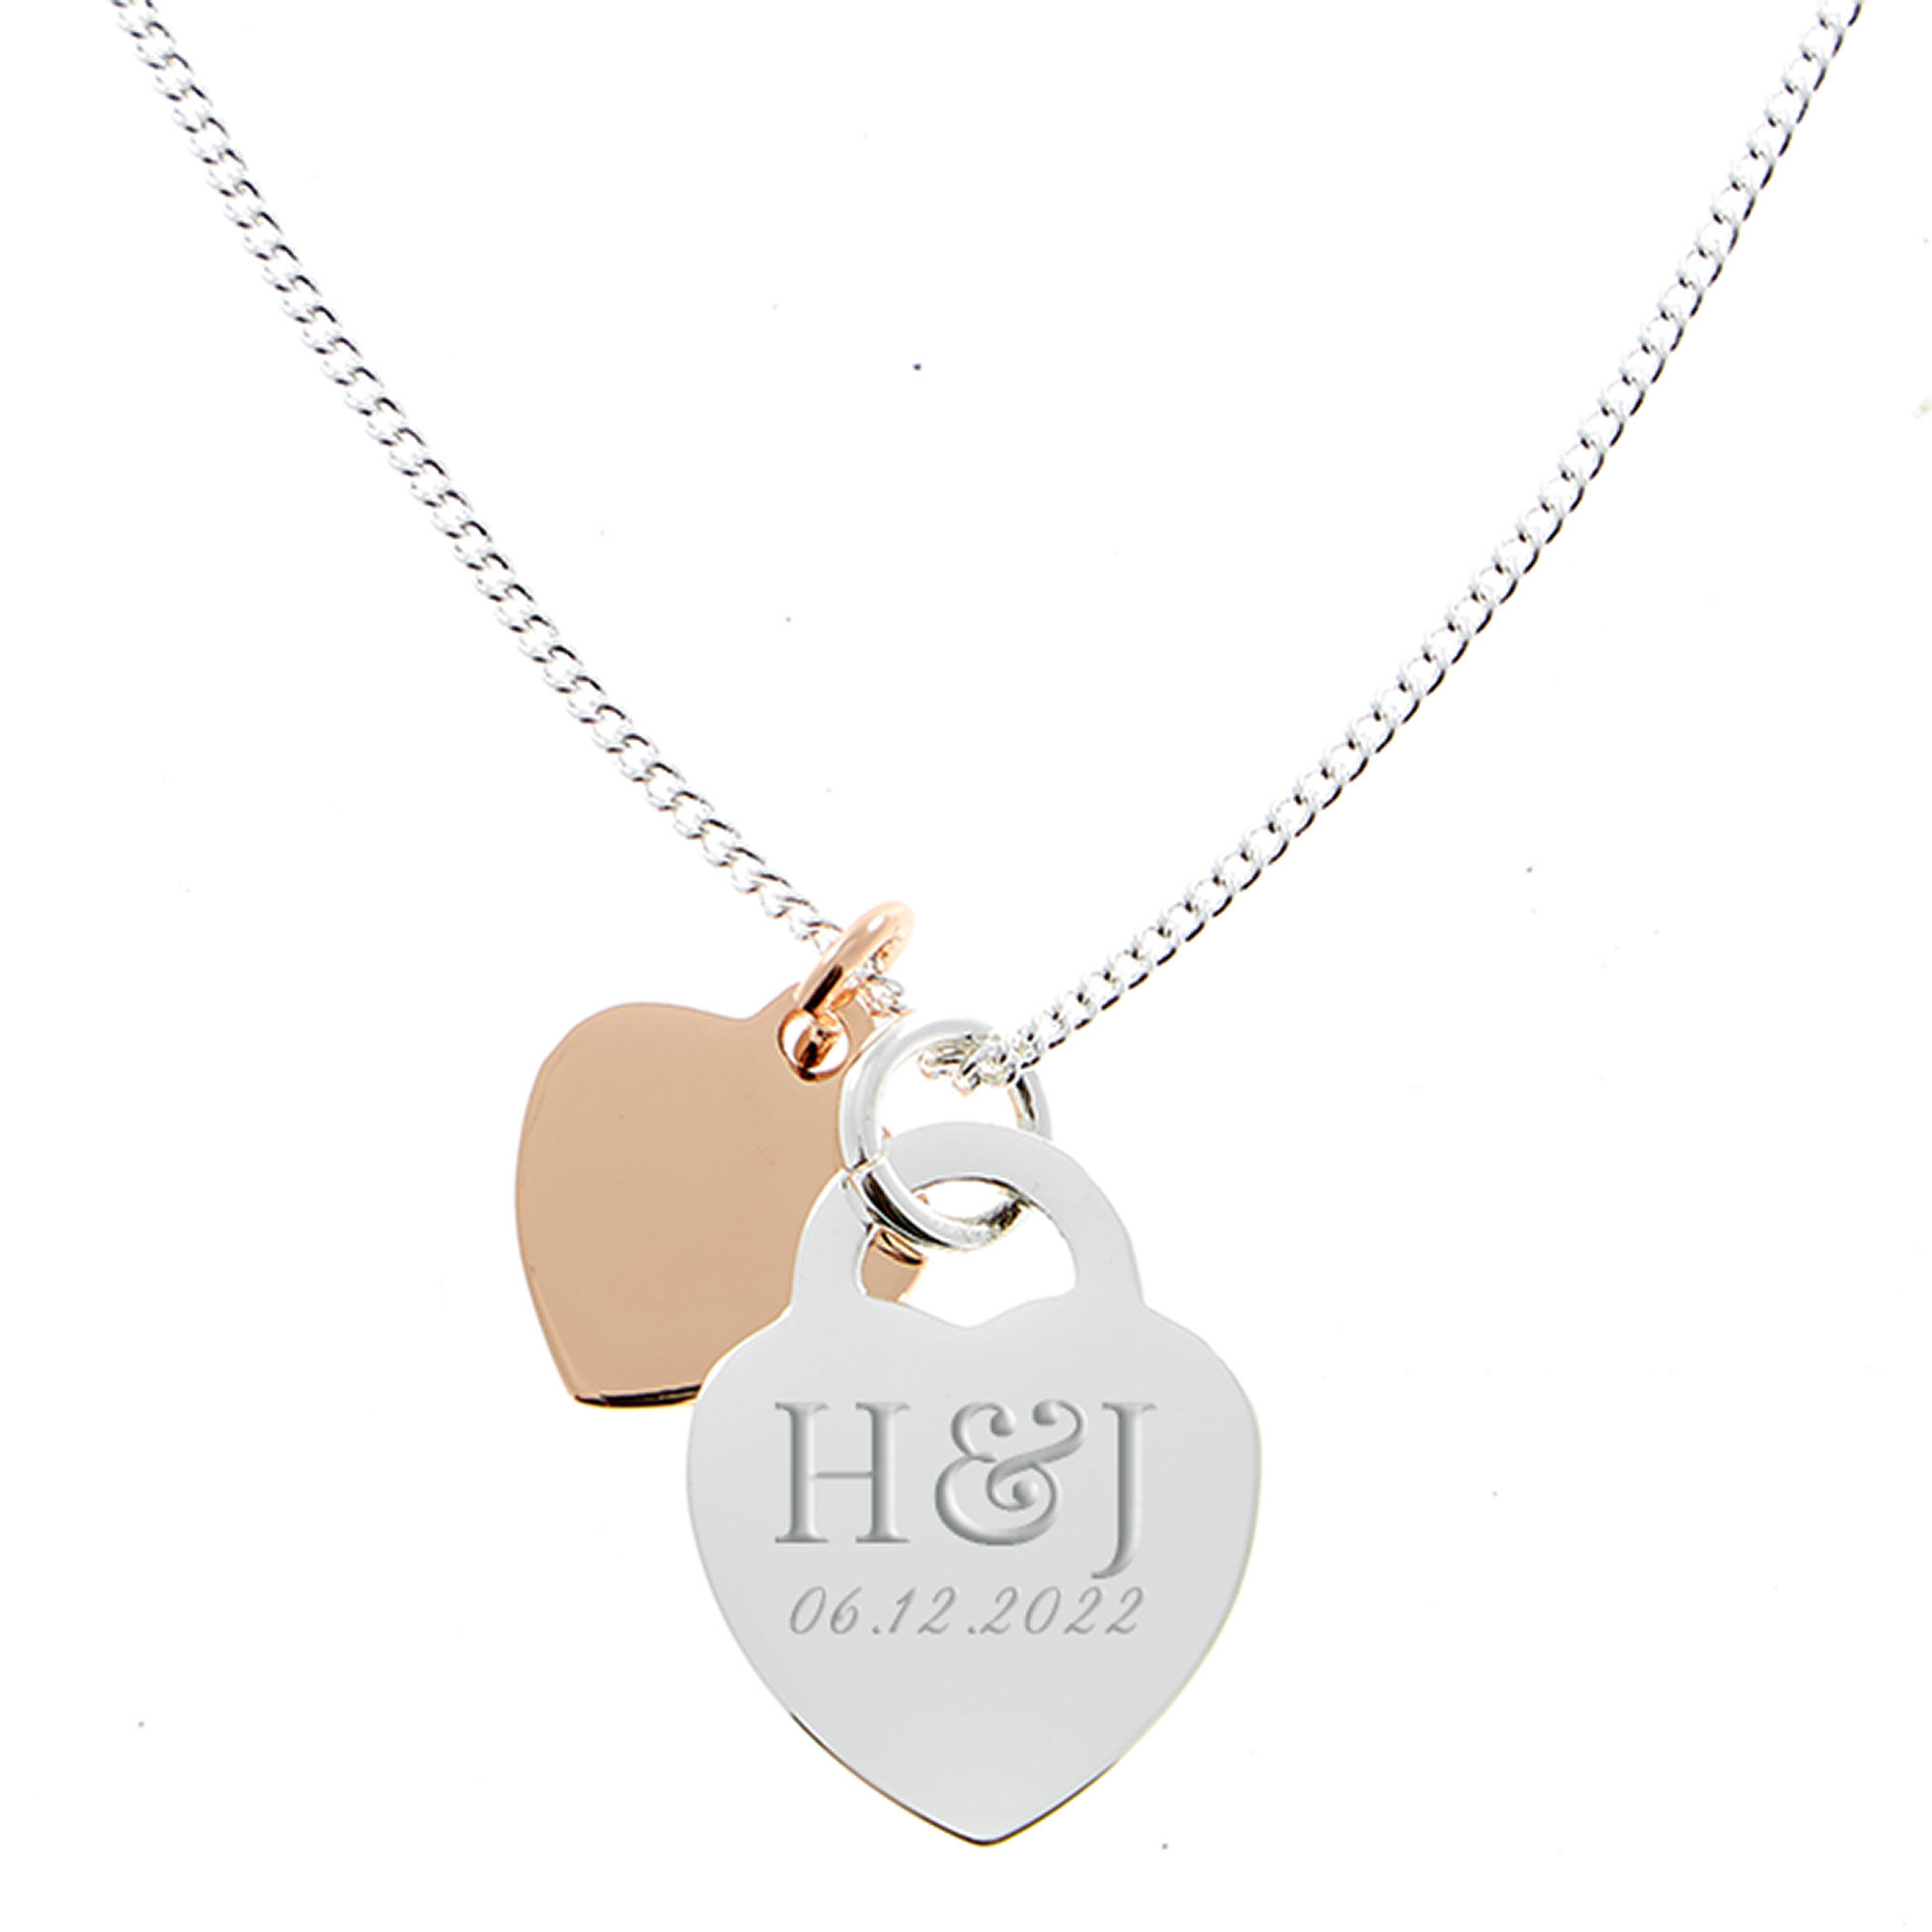 Double Silver Hearts Necklace with Engraving | Charming Engraving